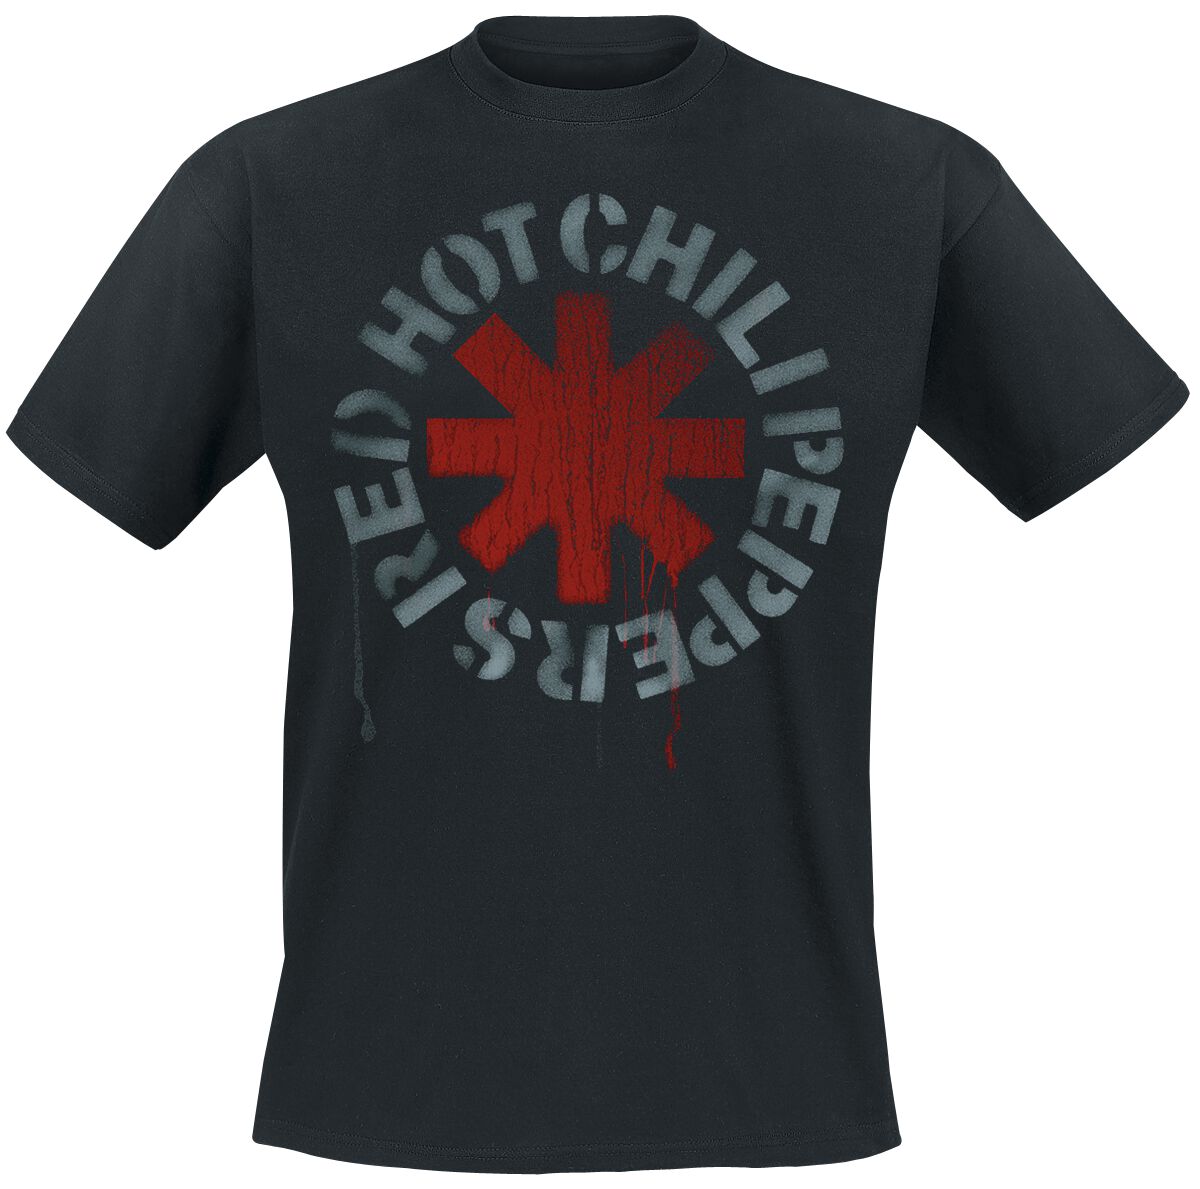 Image of Red Hot Chili Peppers Stencil Black T-Shirt schwarz